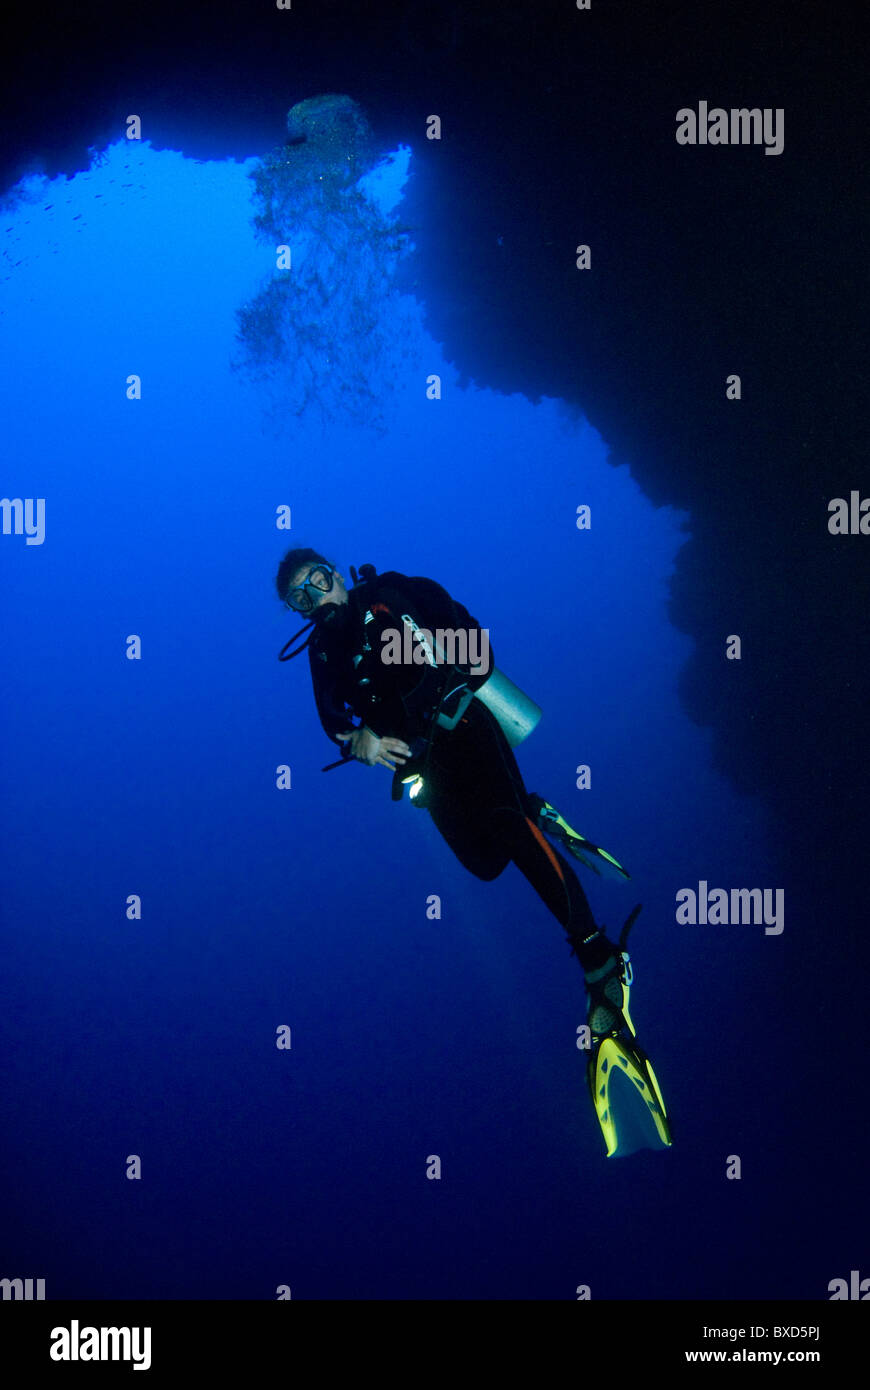 Scuba diver in the blue hole cathedral, Dahab, Egypt, Red Sea Stock Photo